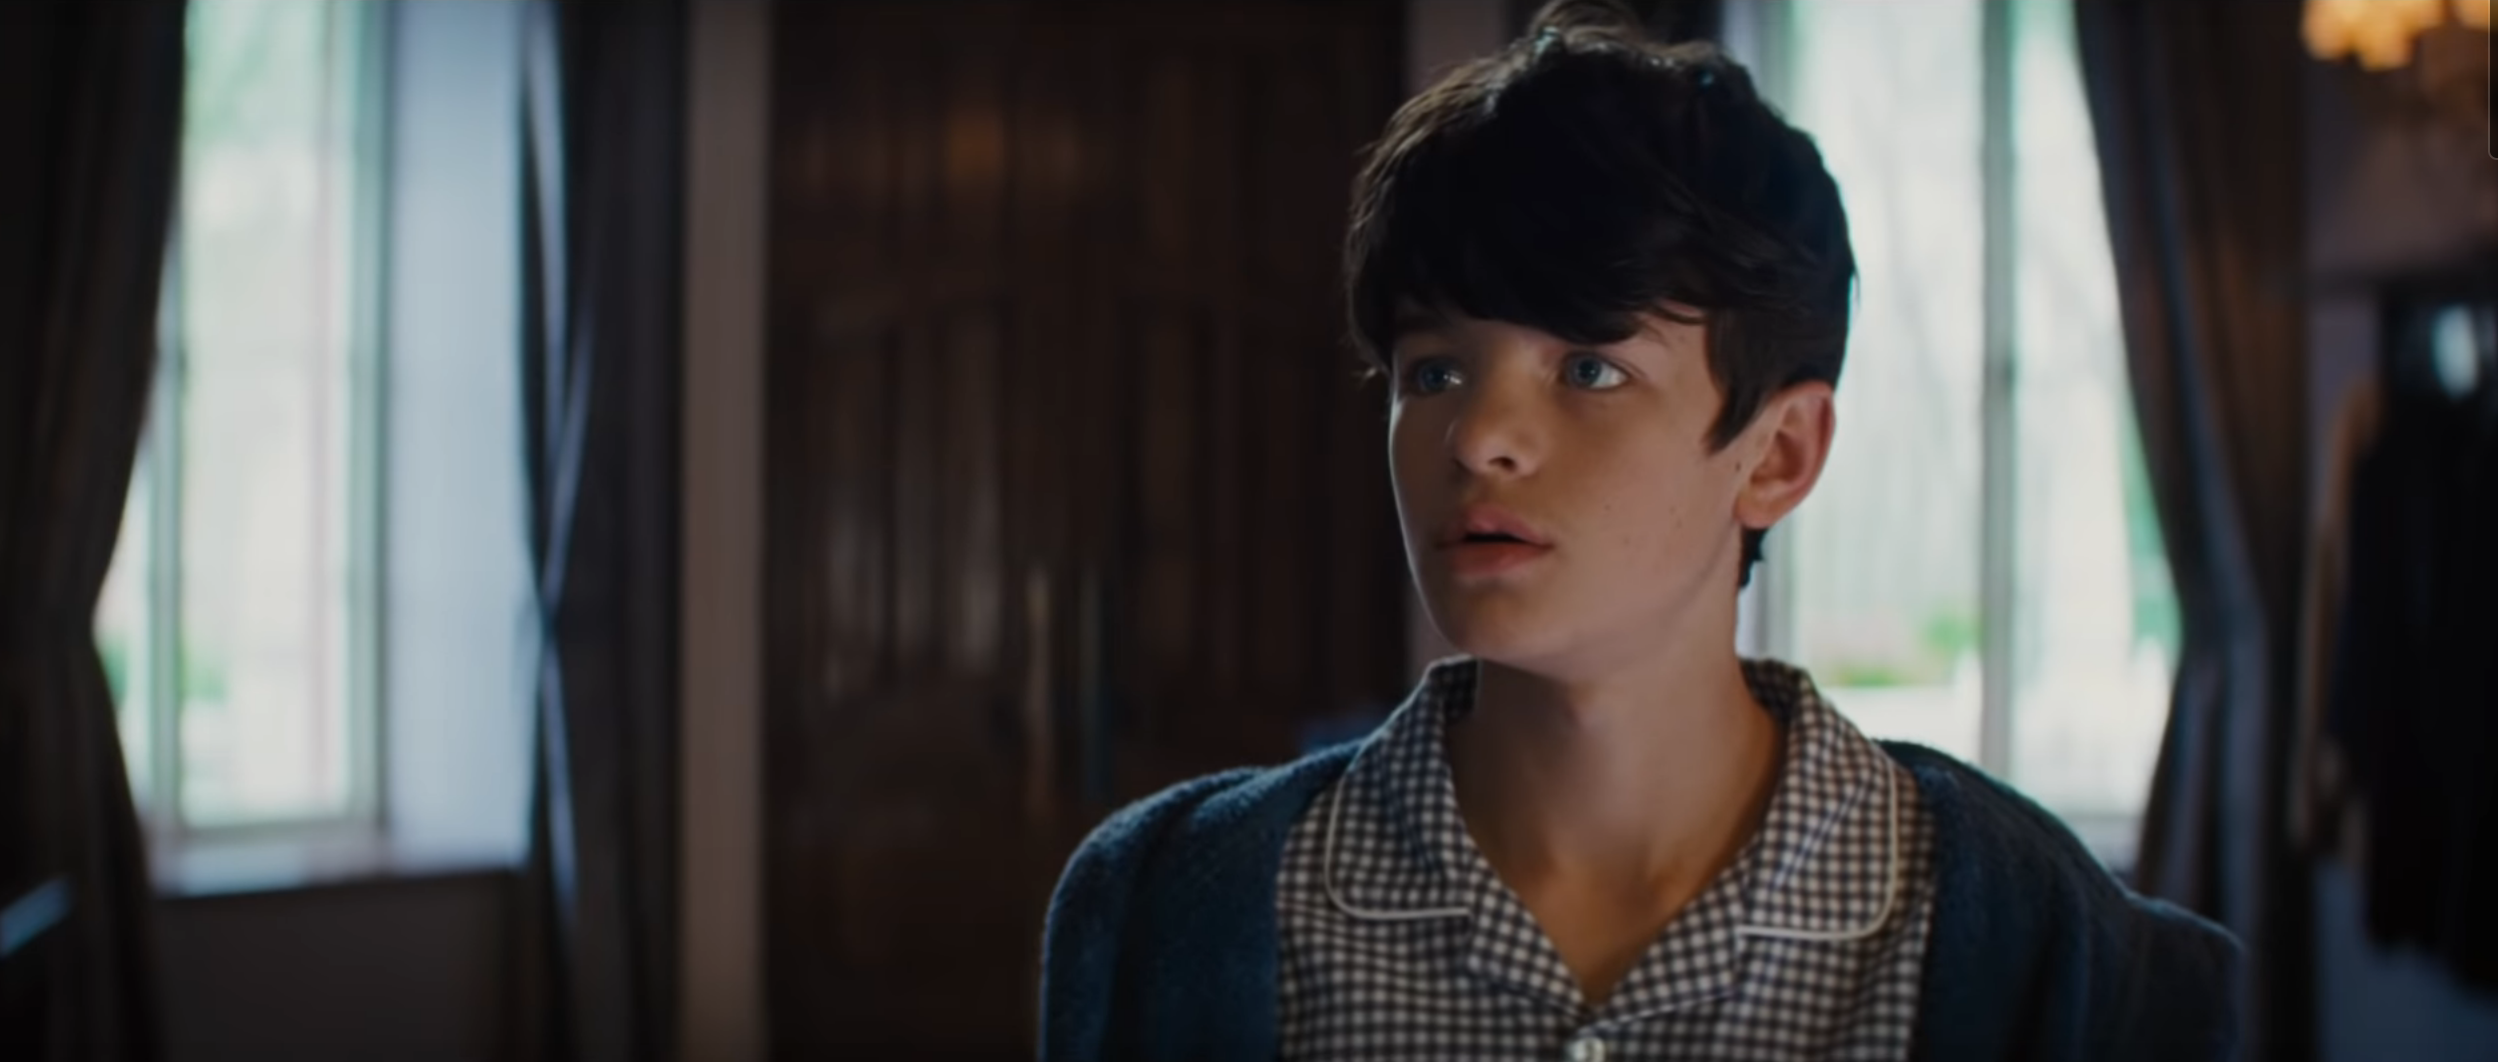 “Artemis Fowl” Movie Releases New Trailer to Fan Backlash